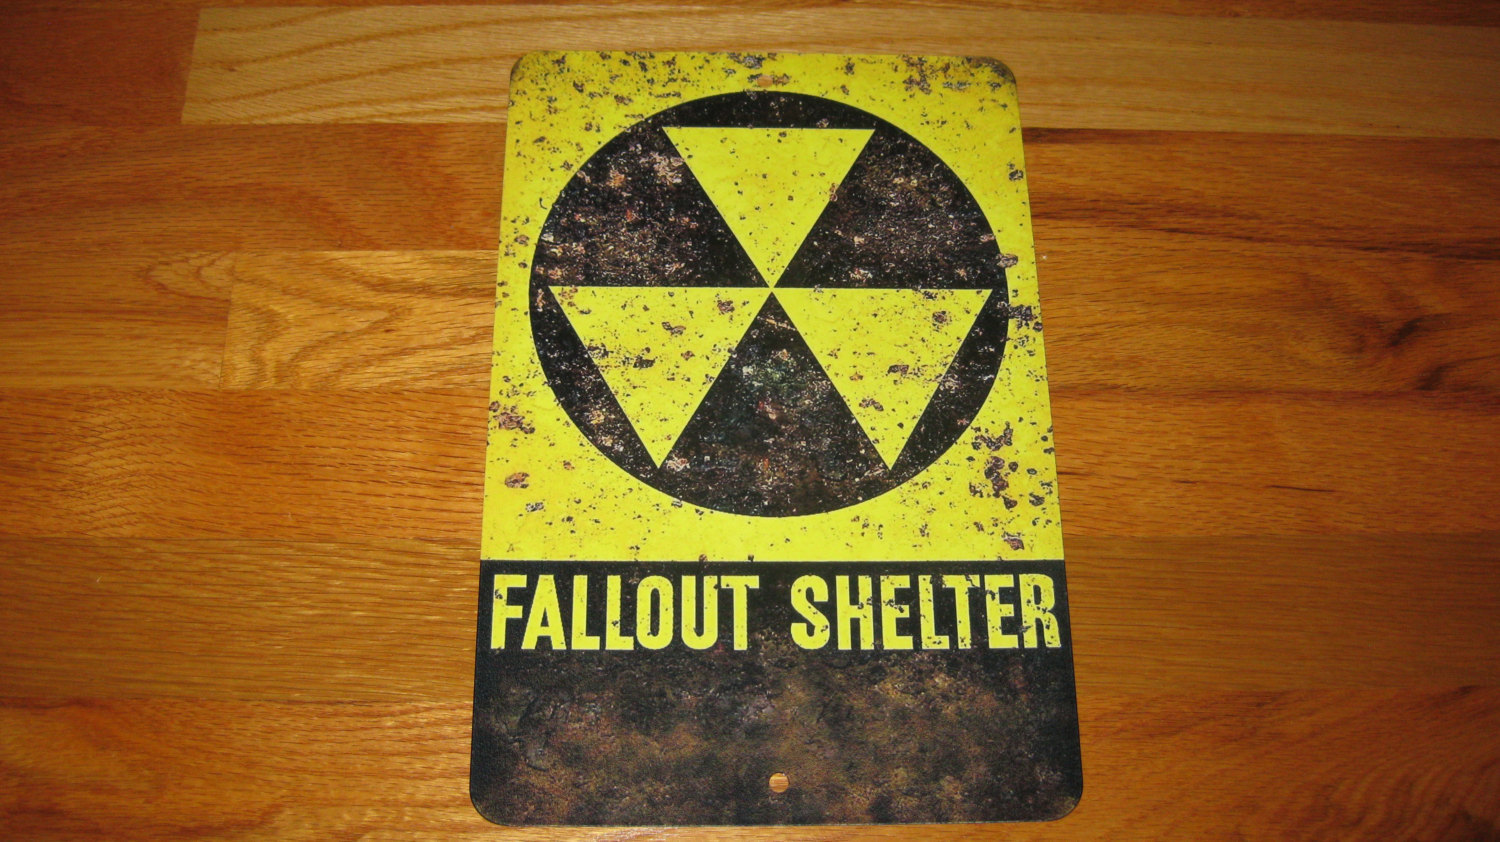 early fallout shelter signs